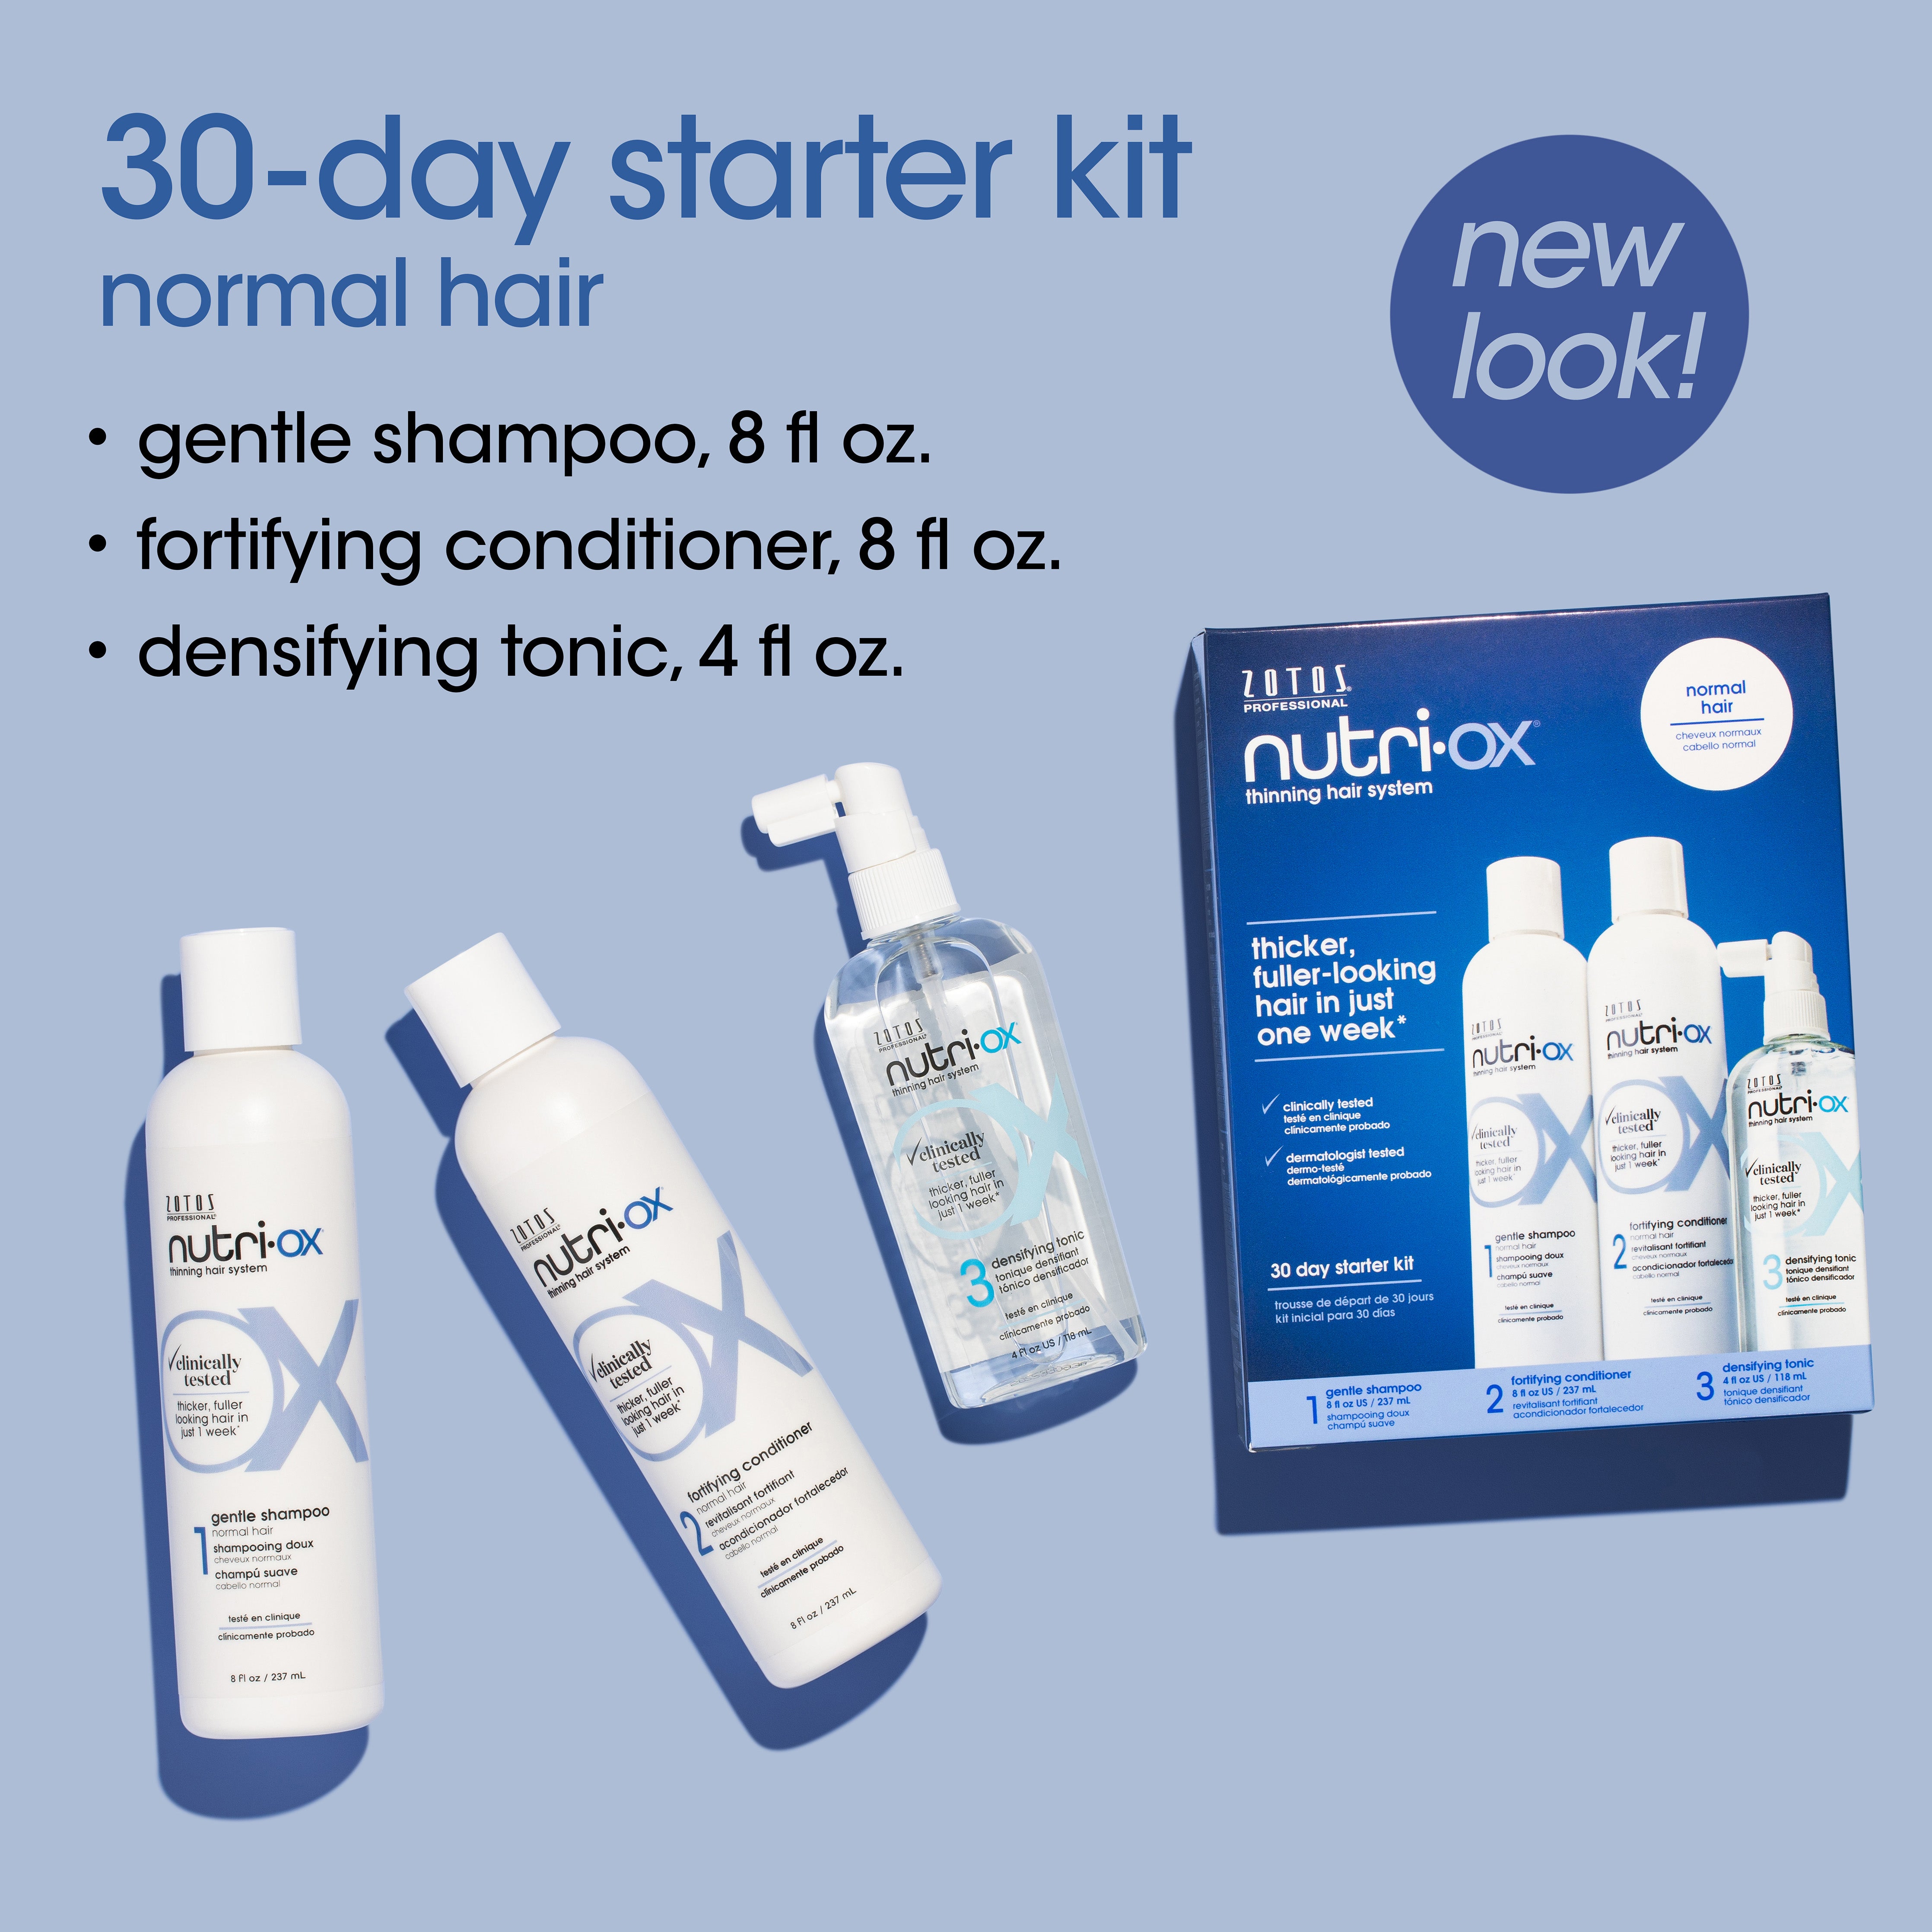 The three bottles included in the 30-day starter kit for normal hair. Includes: gentle shampoo, 8 fl oz, fortifying conditioner, 8 fl oz, and densifying tonic, 4 fl oz.